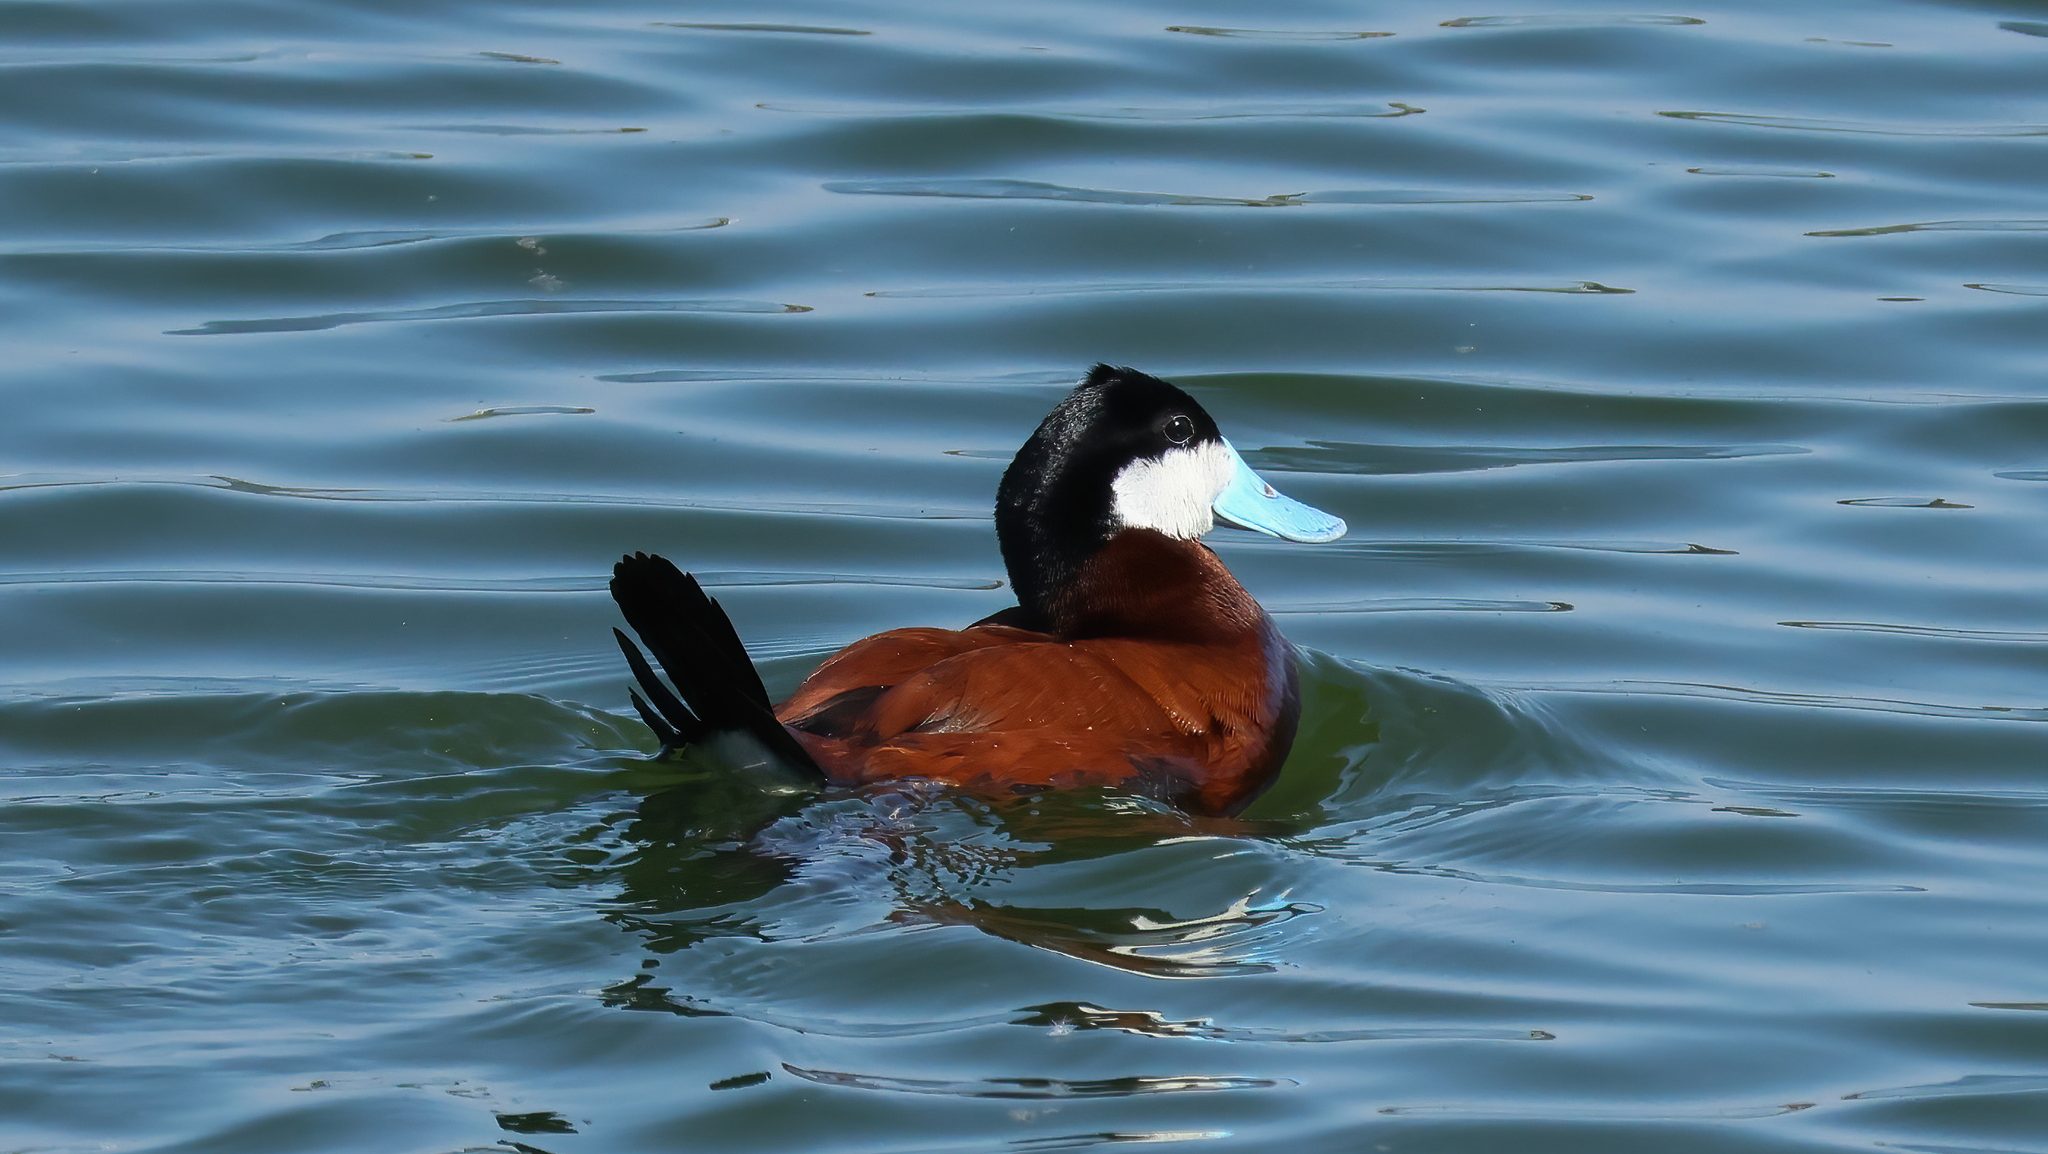 reddish duck with blue bill and white face patch